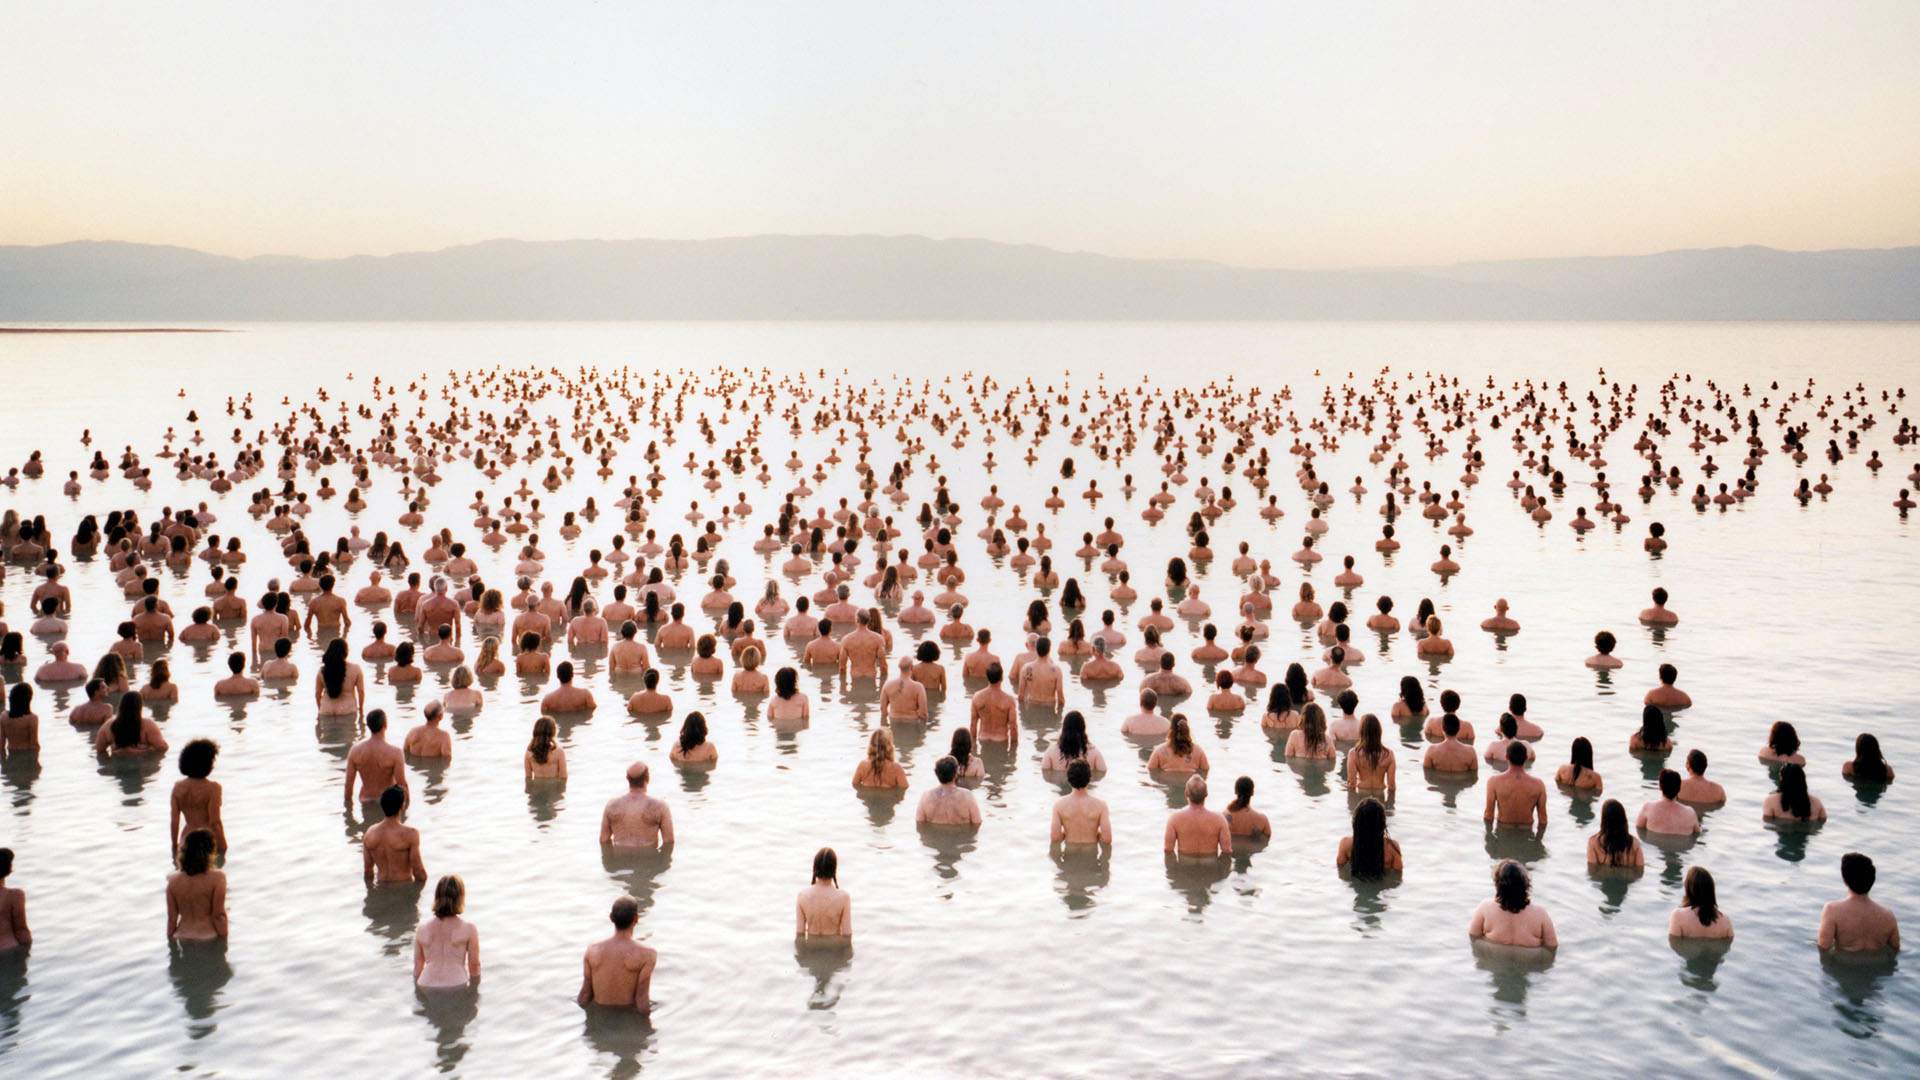 Artist Spencer Tunick Is Returning to Australia for a New Nude Photography Work Along the Brisbane River